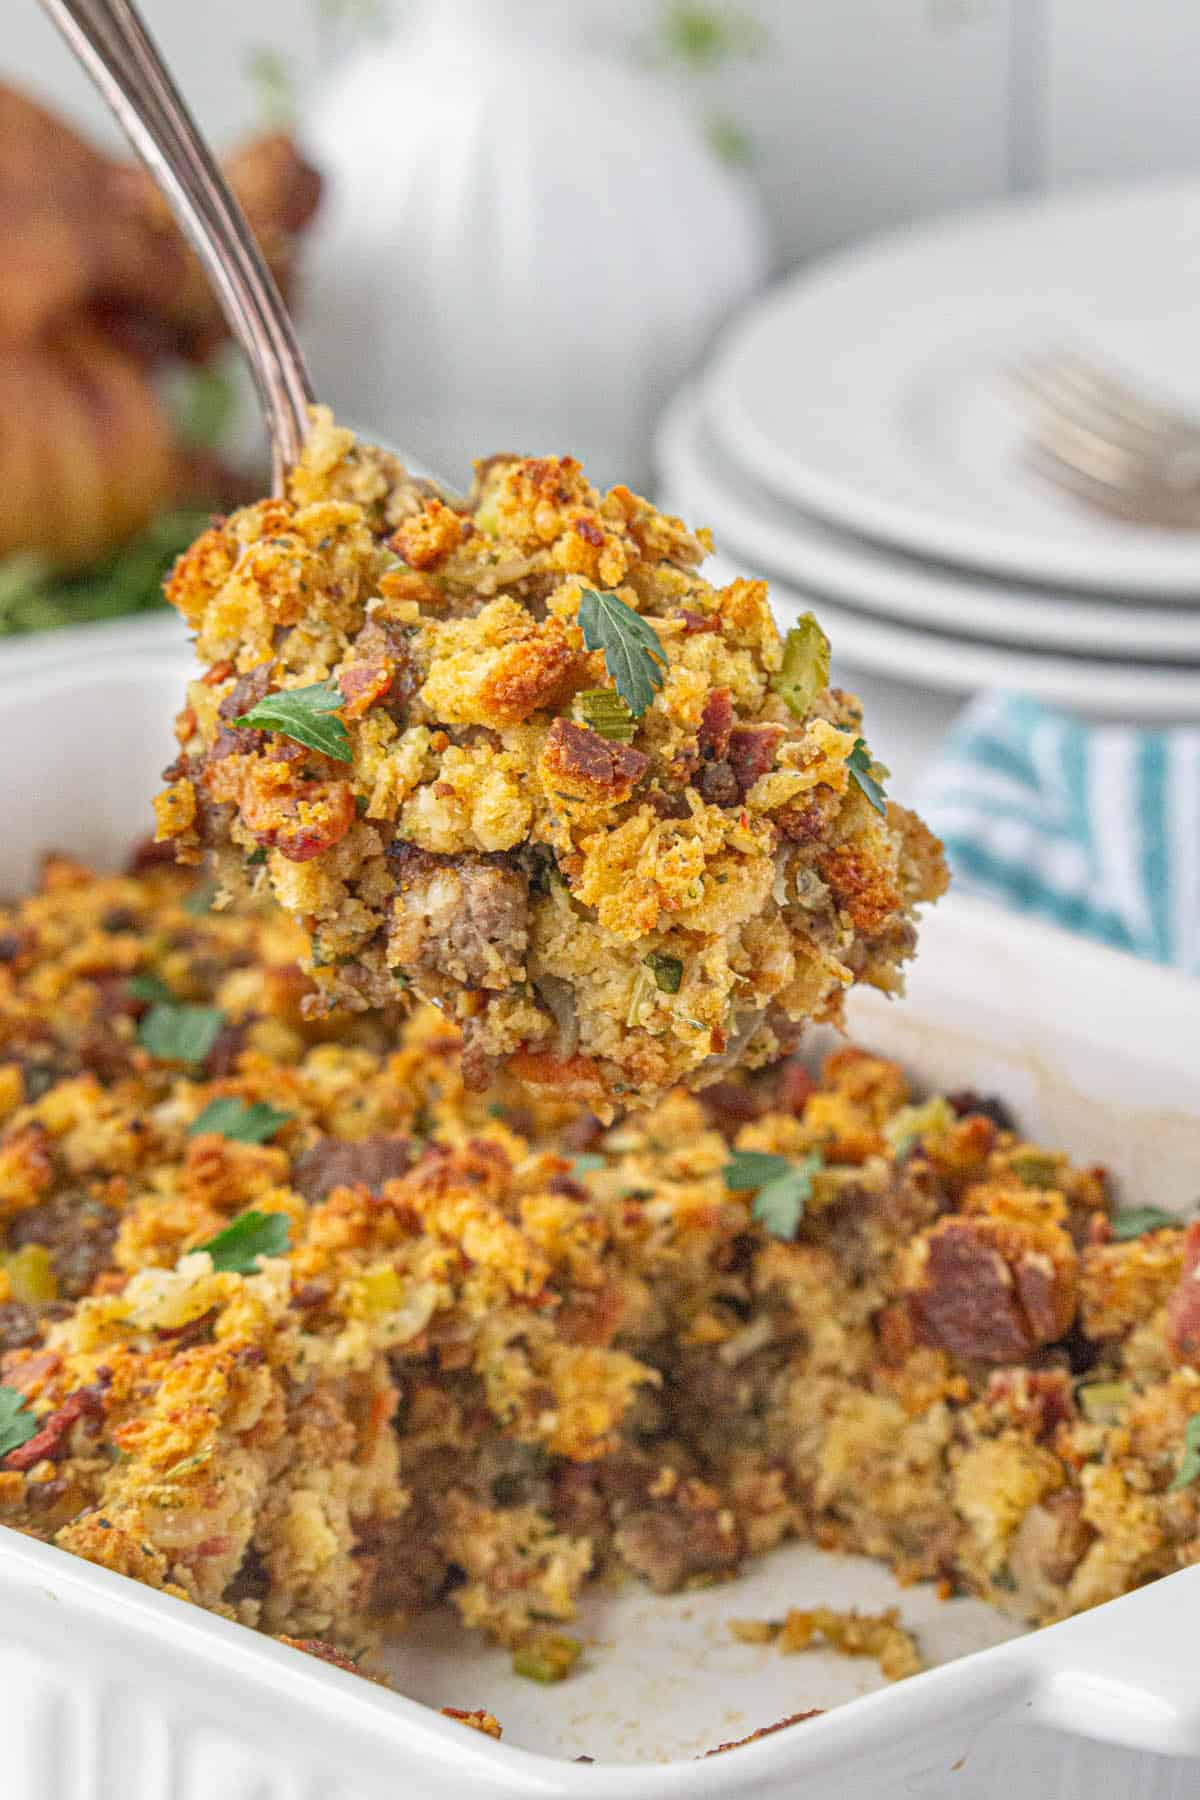 A casserole dish filled with sausage and bacon stuffing, with a serving spoon removing a big scoop.